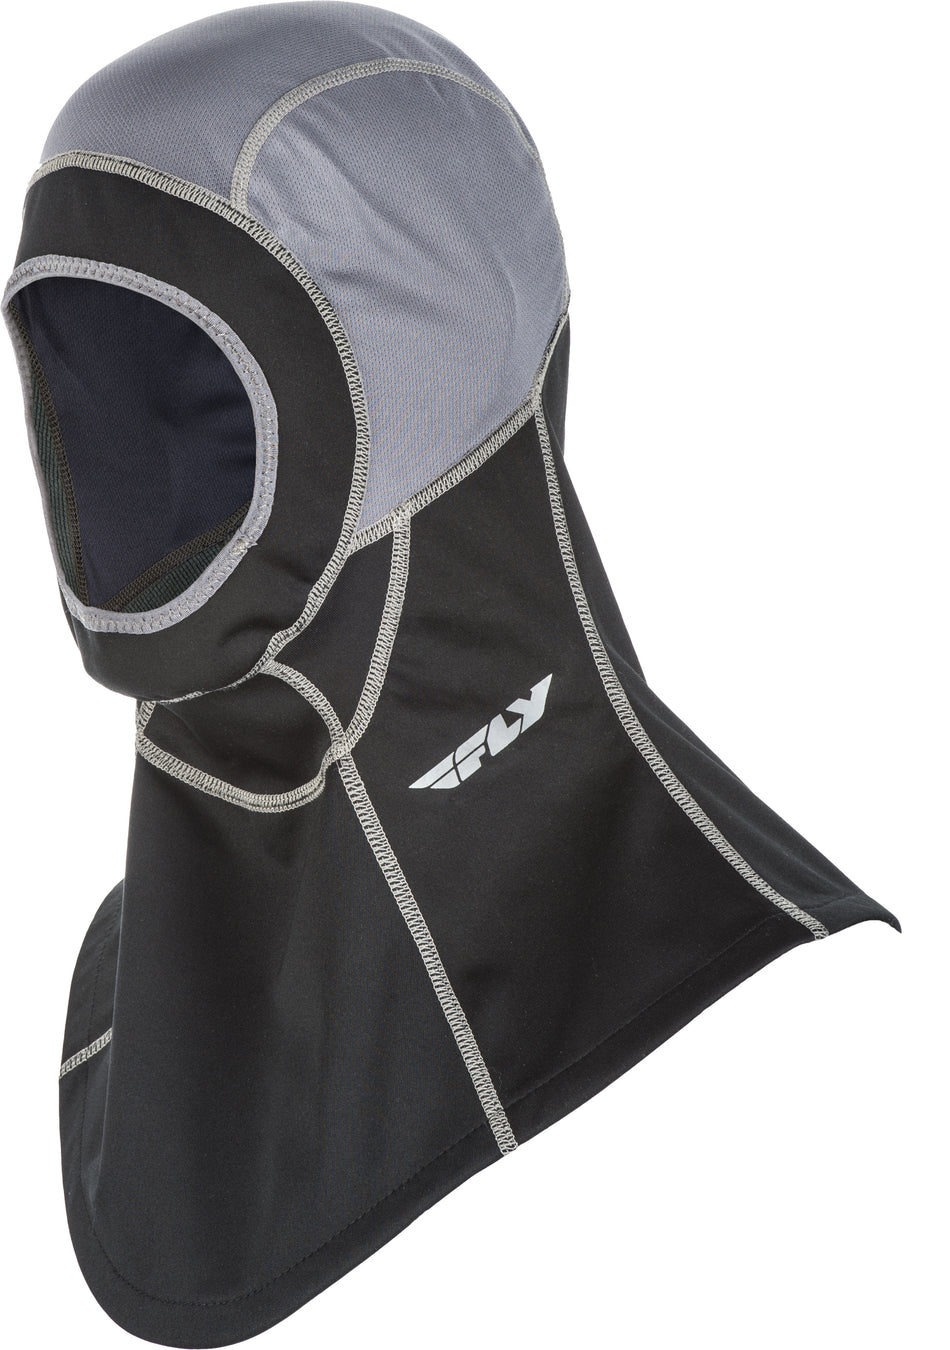 FLY RACING Ignitor Air Open Face Balaclava Black L/X 48-1085L